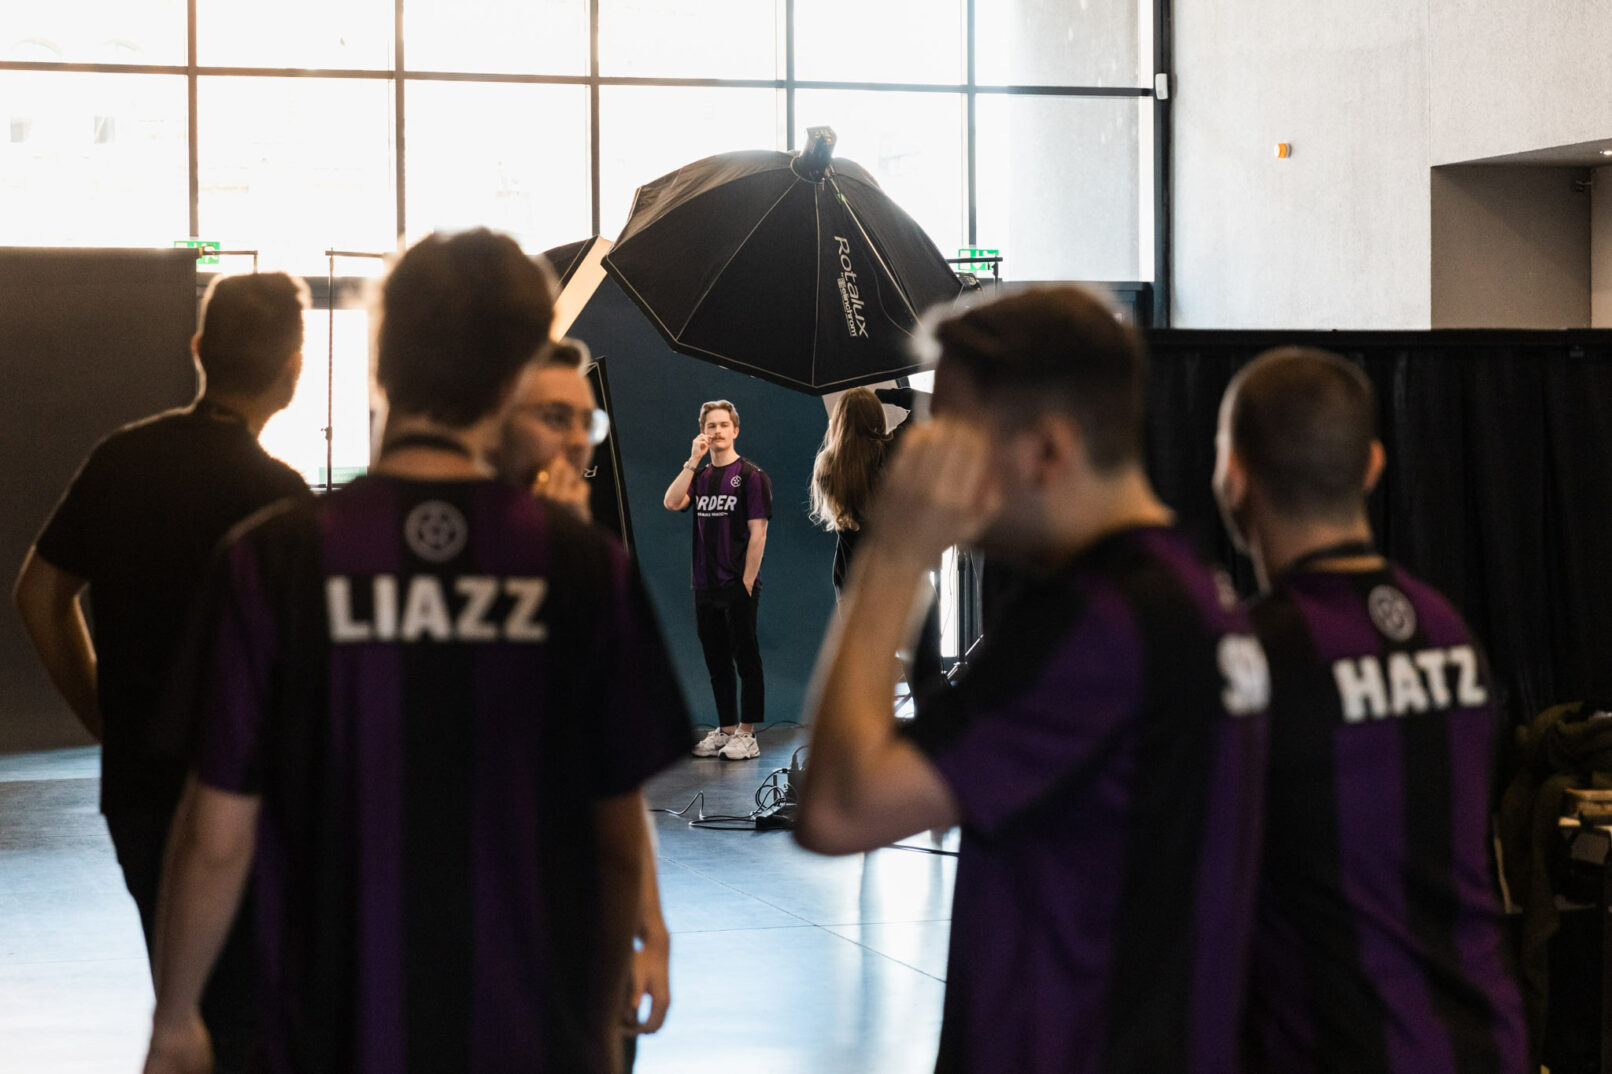 behind the scenes portrait photography in e sports